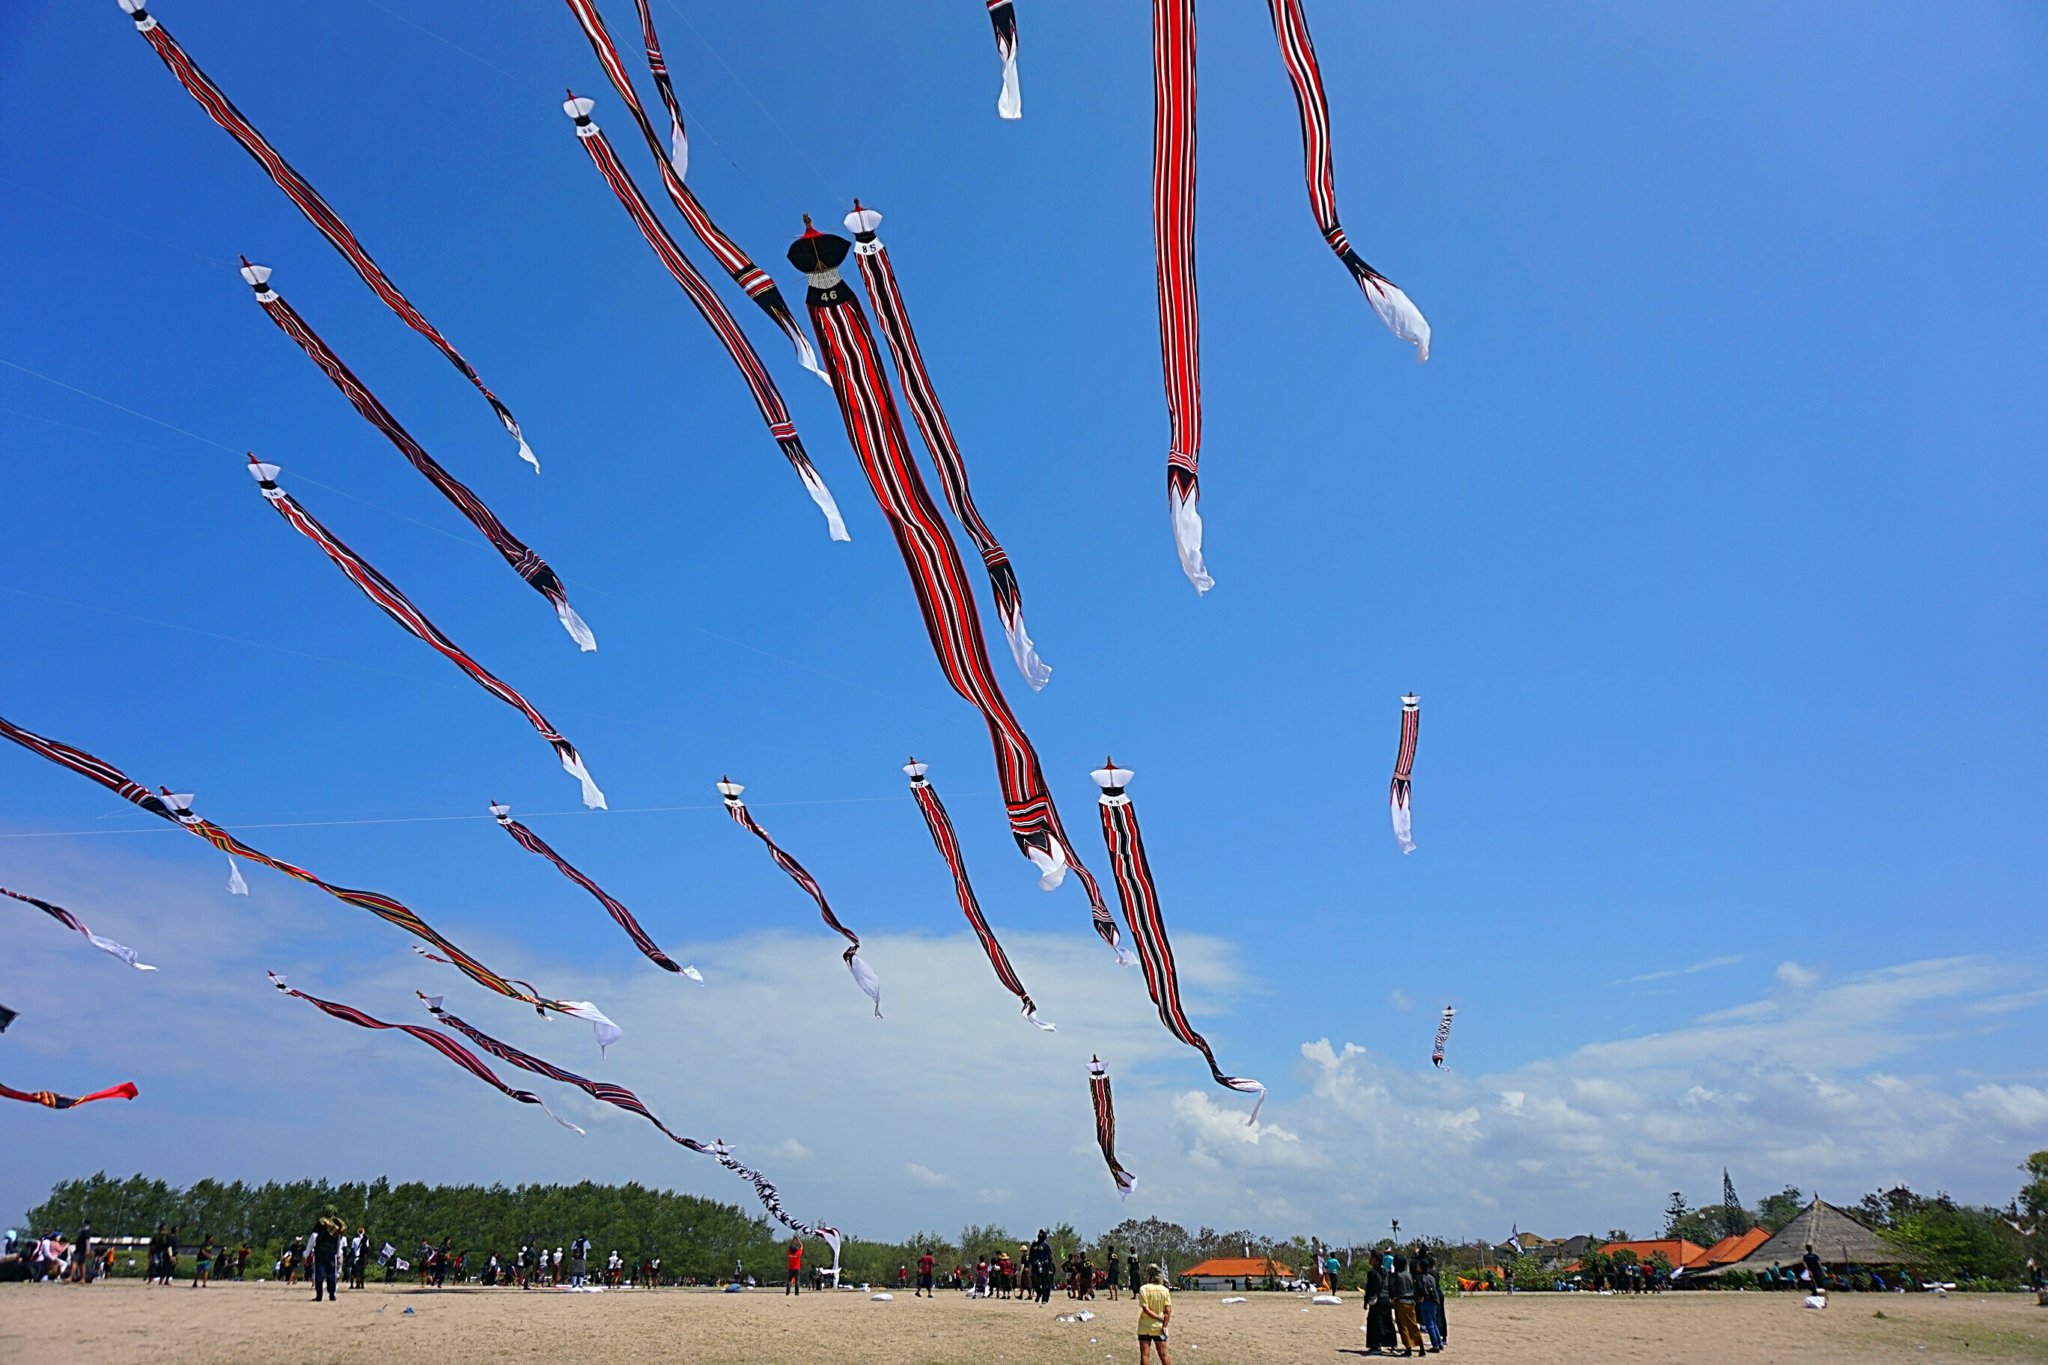 9 Best Kite Festivals Around the World You Need to See